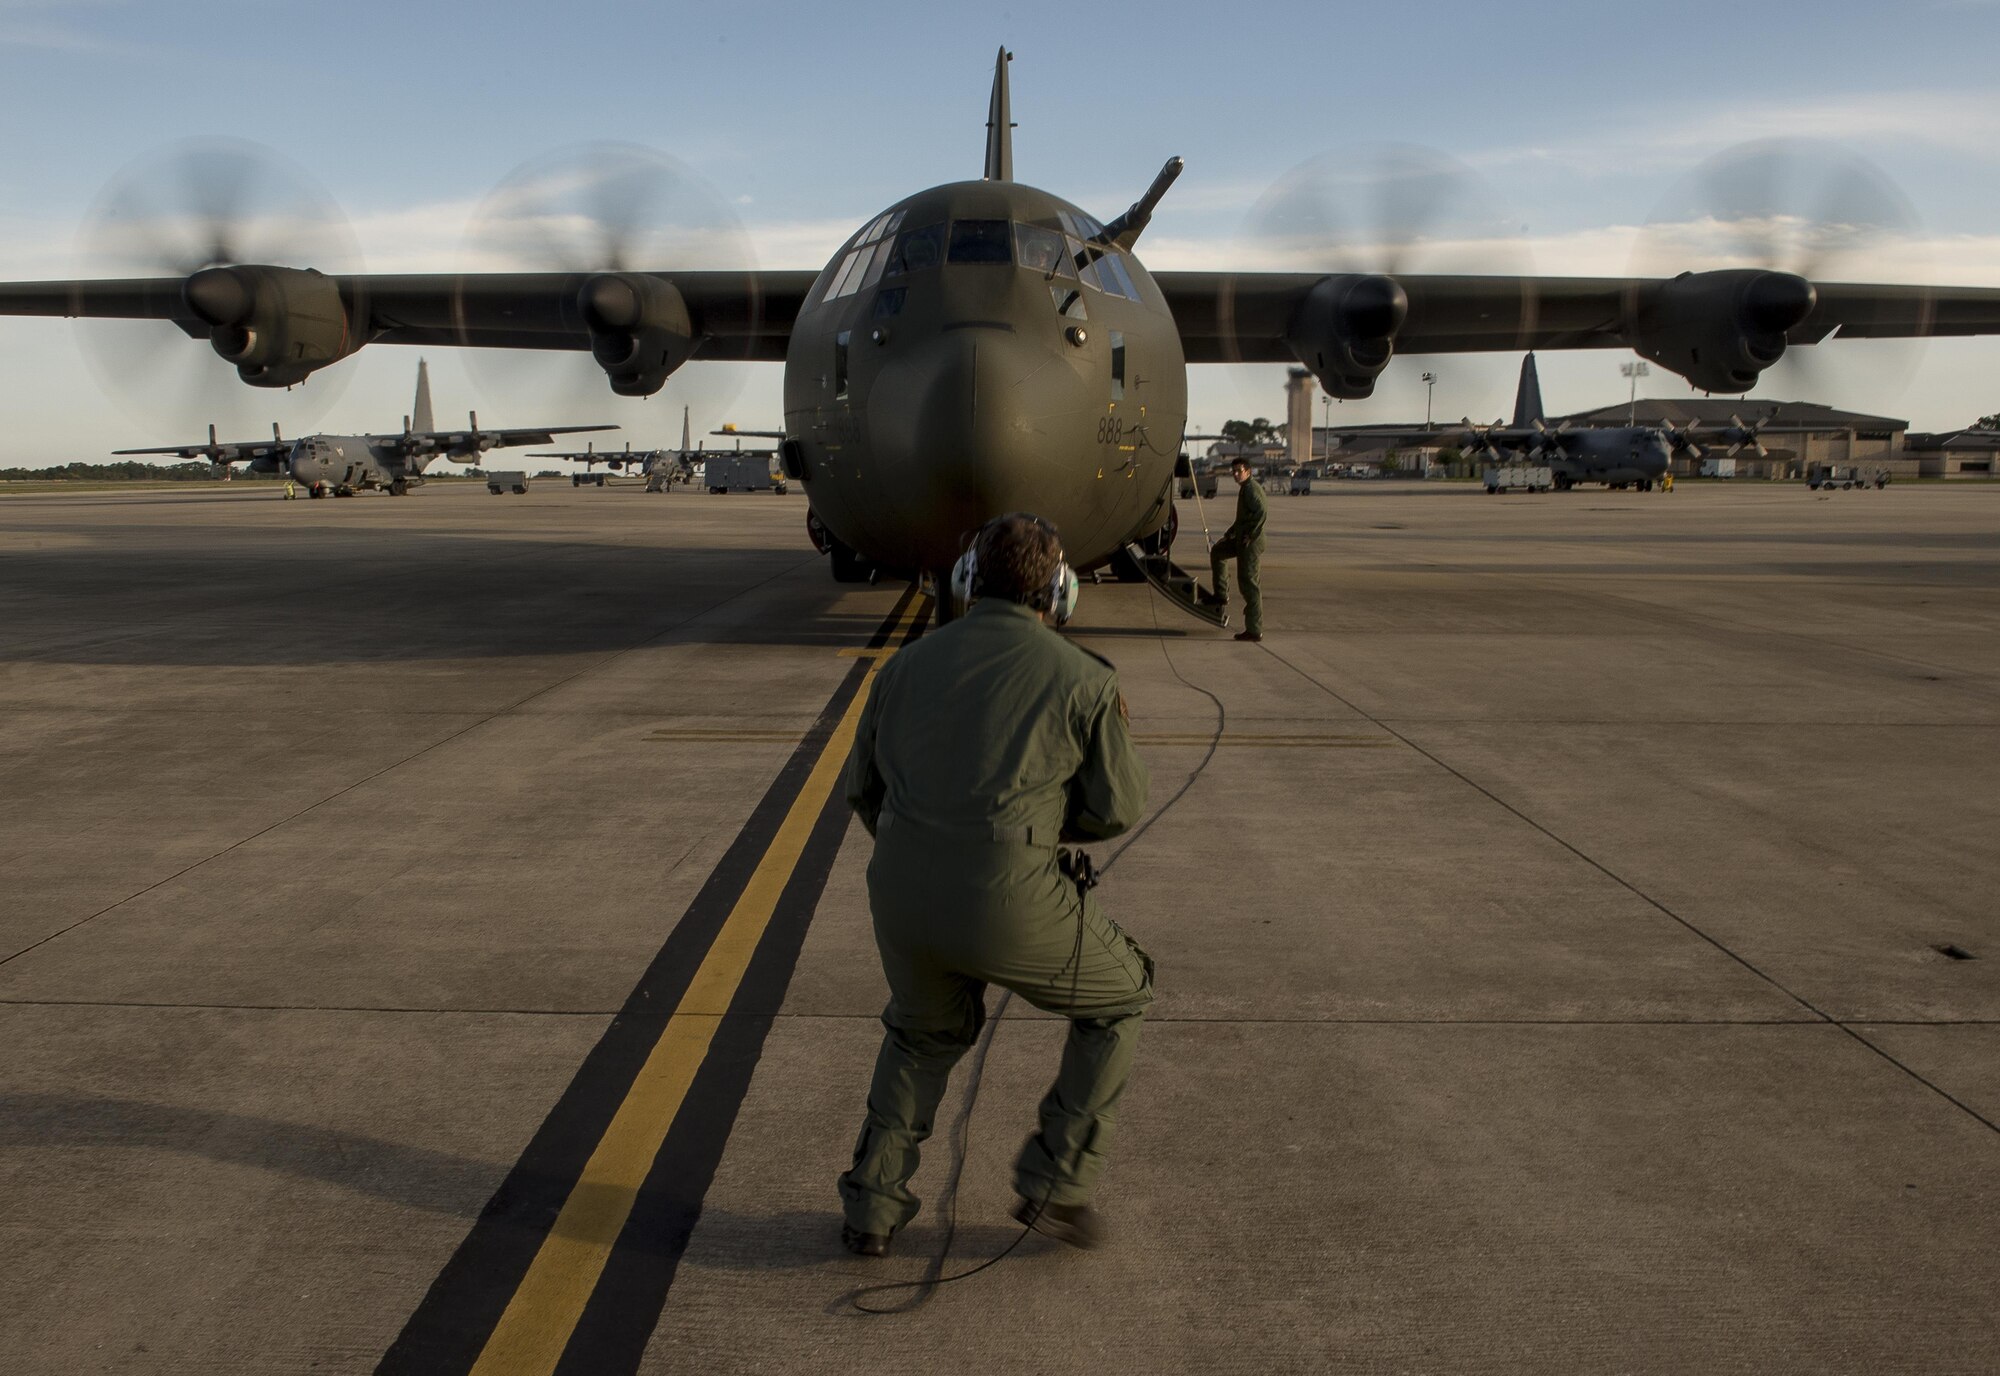 British Royal Air Force C-130J engineers conduct start up procedures before taking off in support of Emerald Warrior, Hurlburt Field, Fla., April 22, 2015. Emerald Warrior is the Department of Defense's only irregular warfare exercise, allowing joint and combined partners to train together and prepare for real world contingency operations. (U.S. Air Force photo by Staff Sgt. Matthew Bruch/Released)